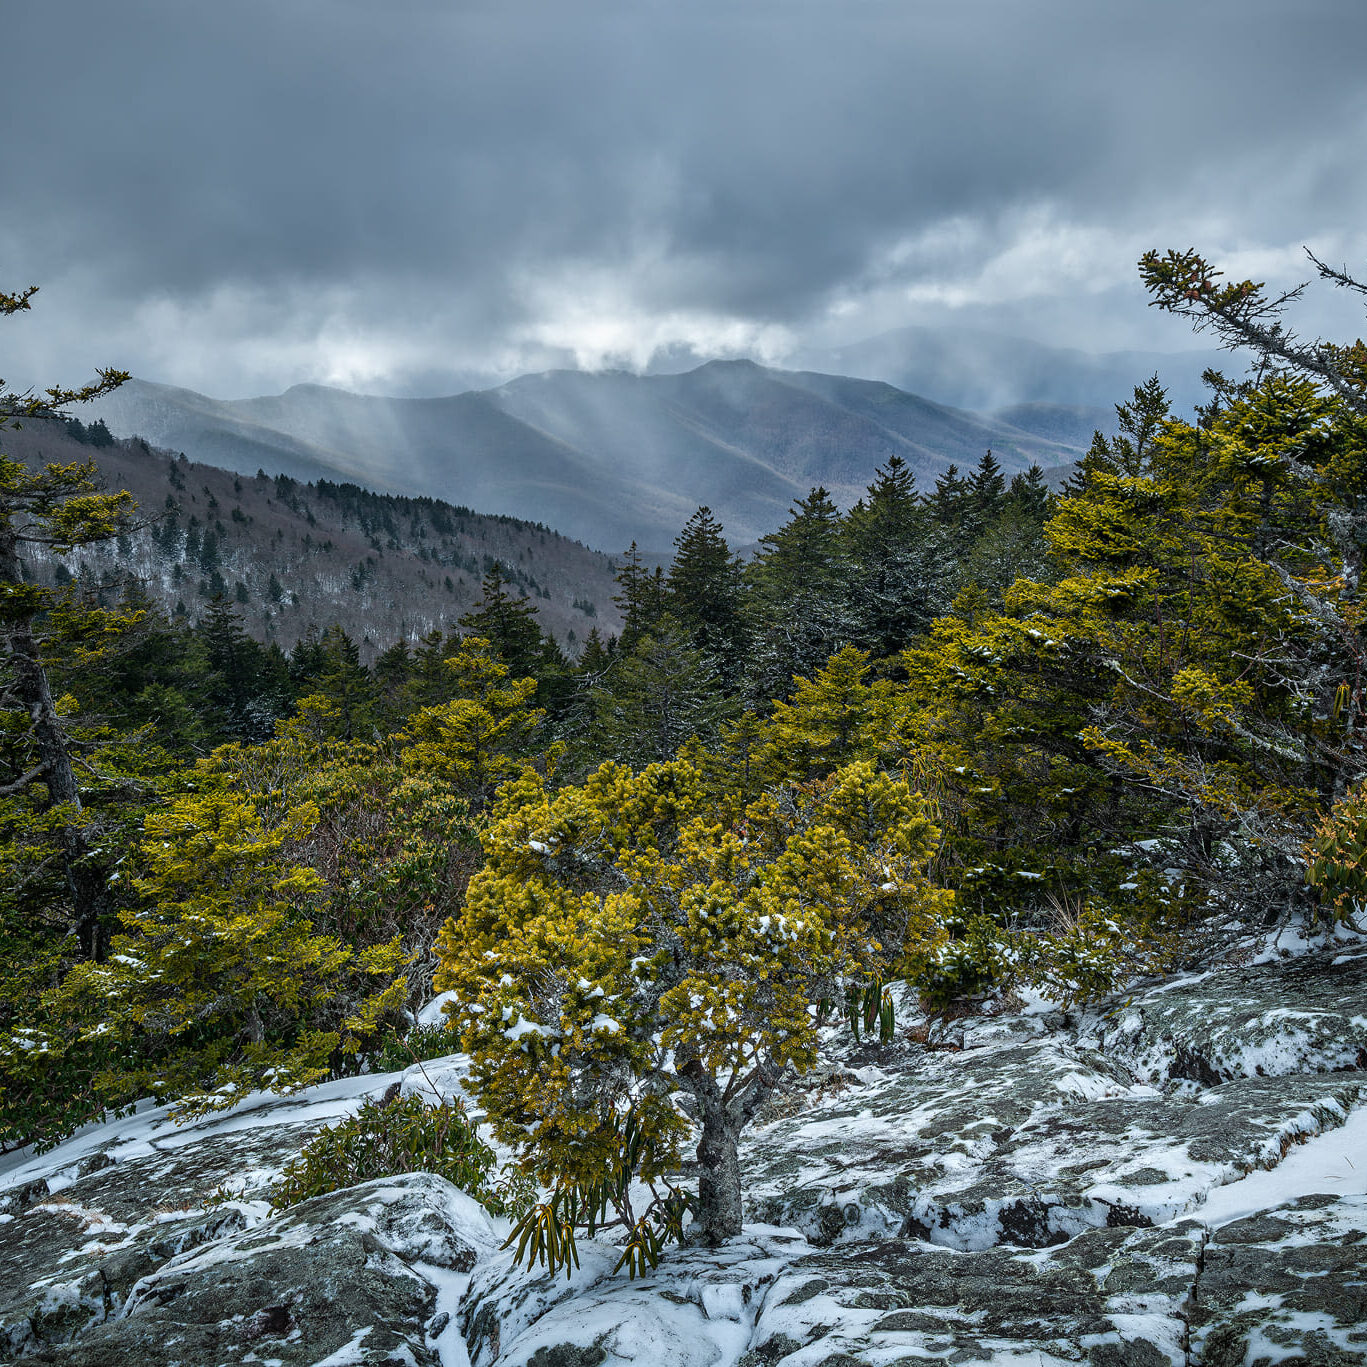 Crazy storm light contrasts with blowing snow high up on a ridge line in the Blue Ridge Mountains of North Carolina.